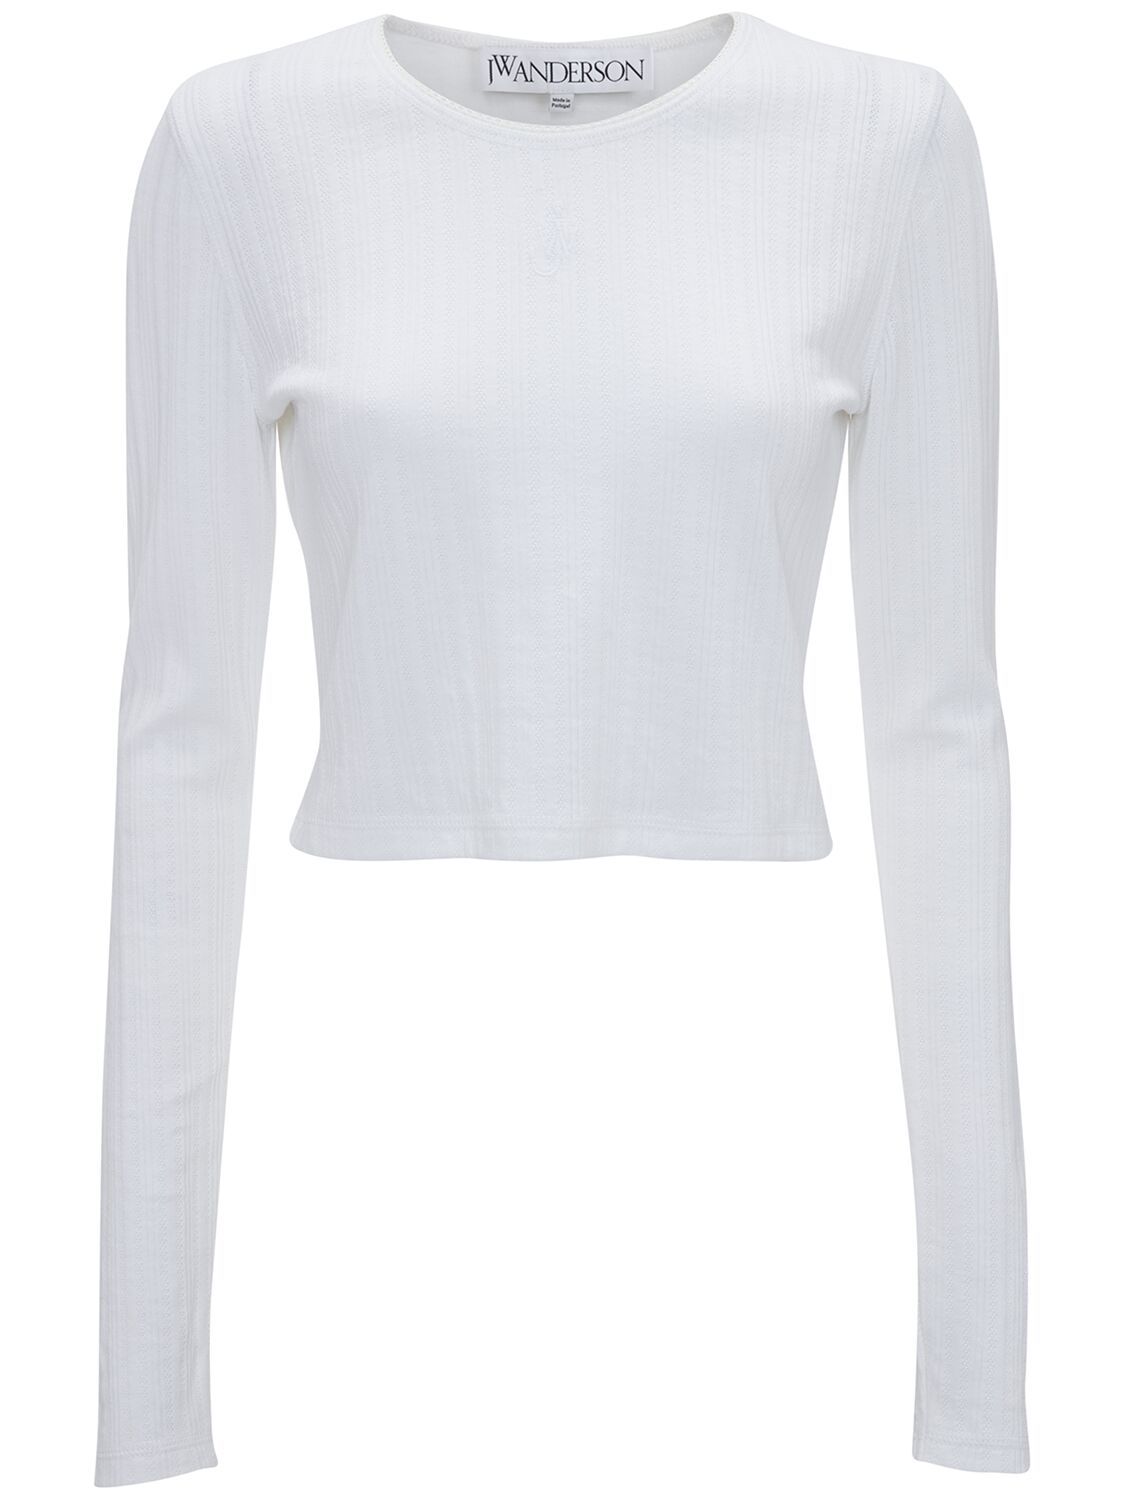 Jw Anderson Anchor Embroidery Cropped L/s Top In White